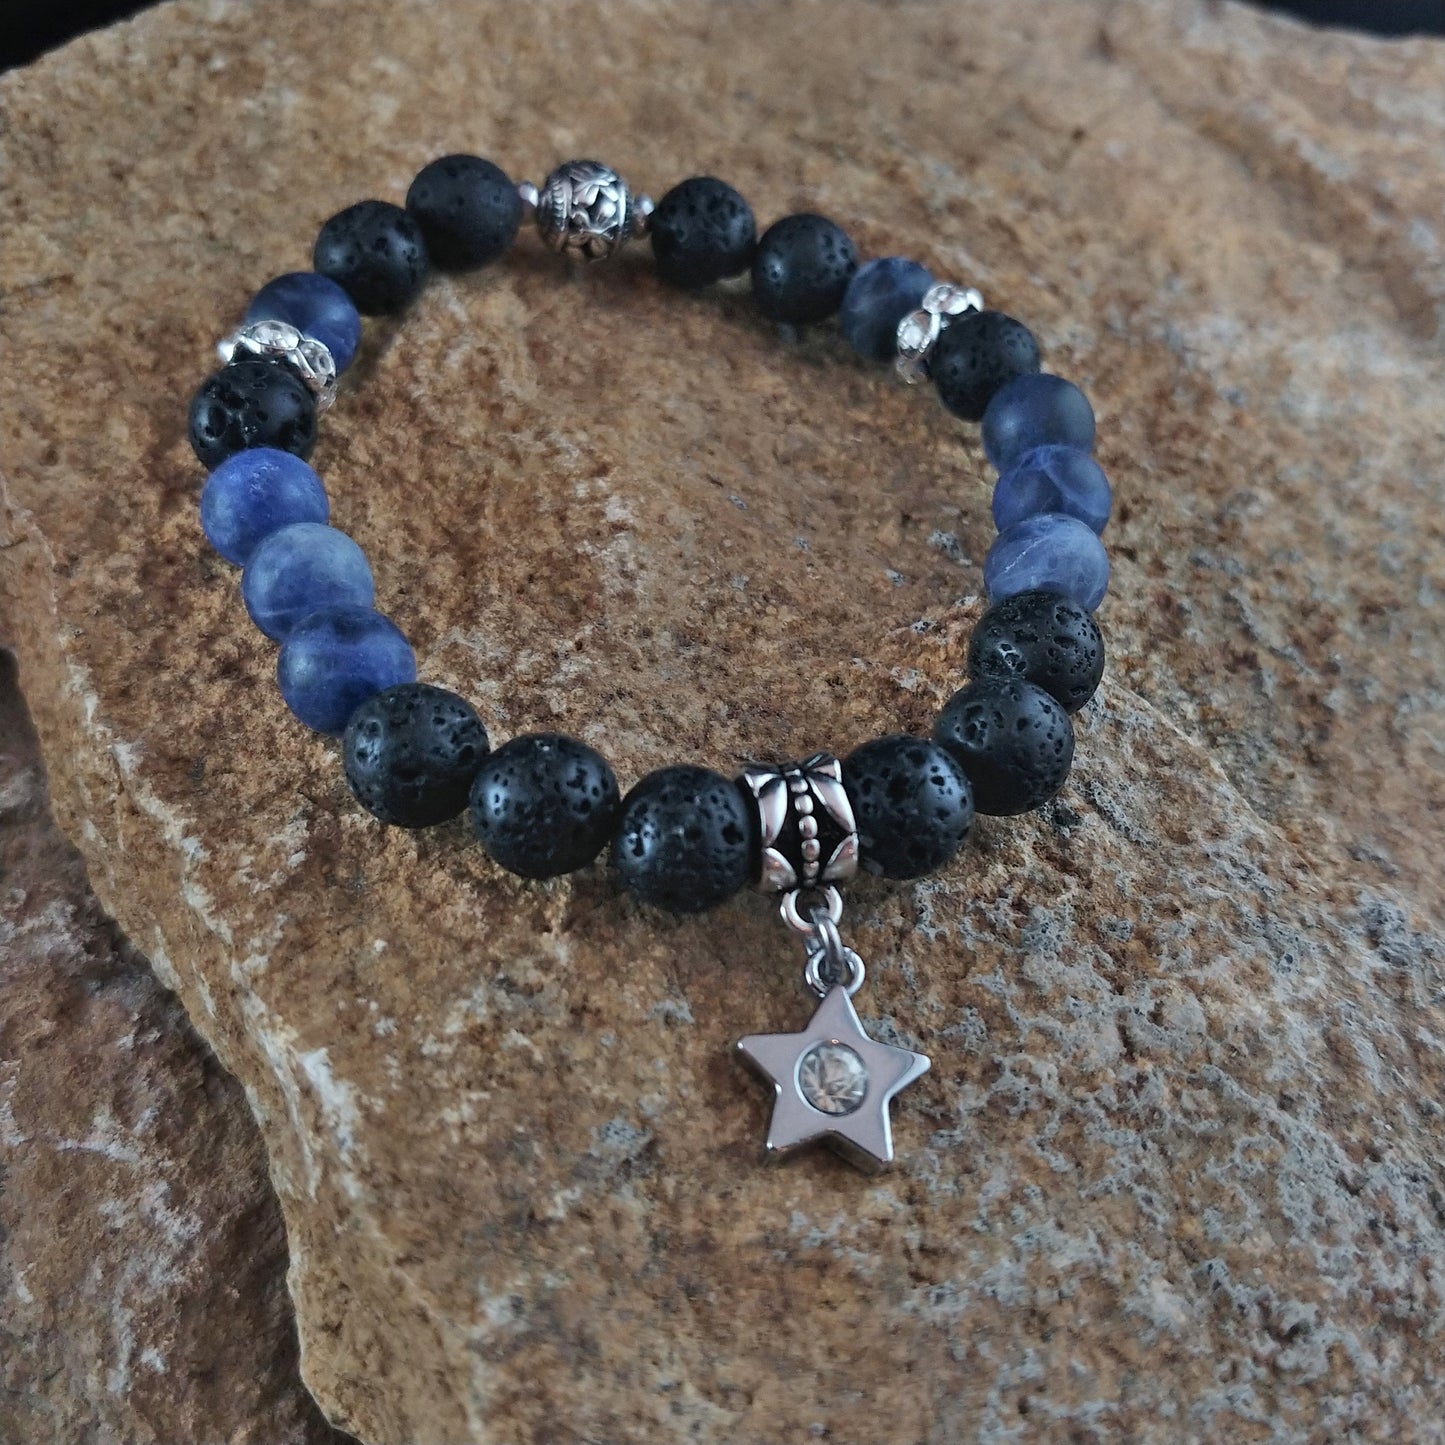 Bracelet with dark blue beads and black lava beads sitting on top of a rock display. The bracelet has a silver colored star centerpiece.